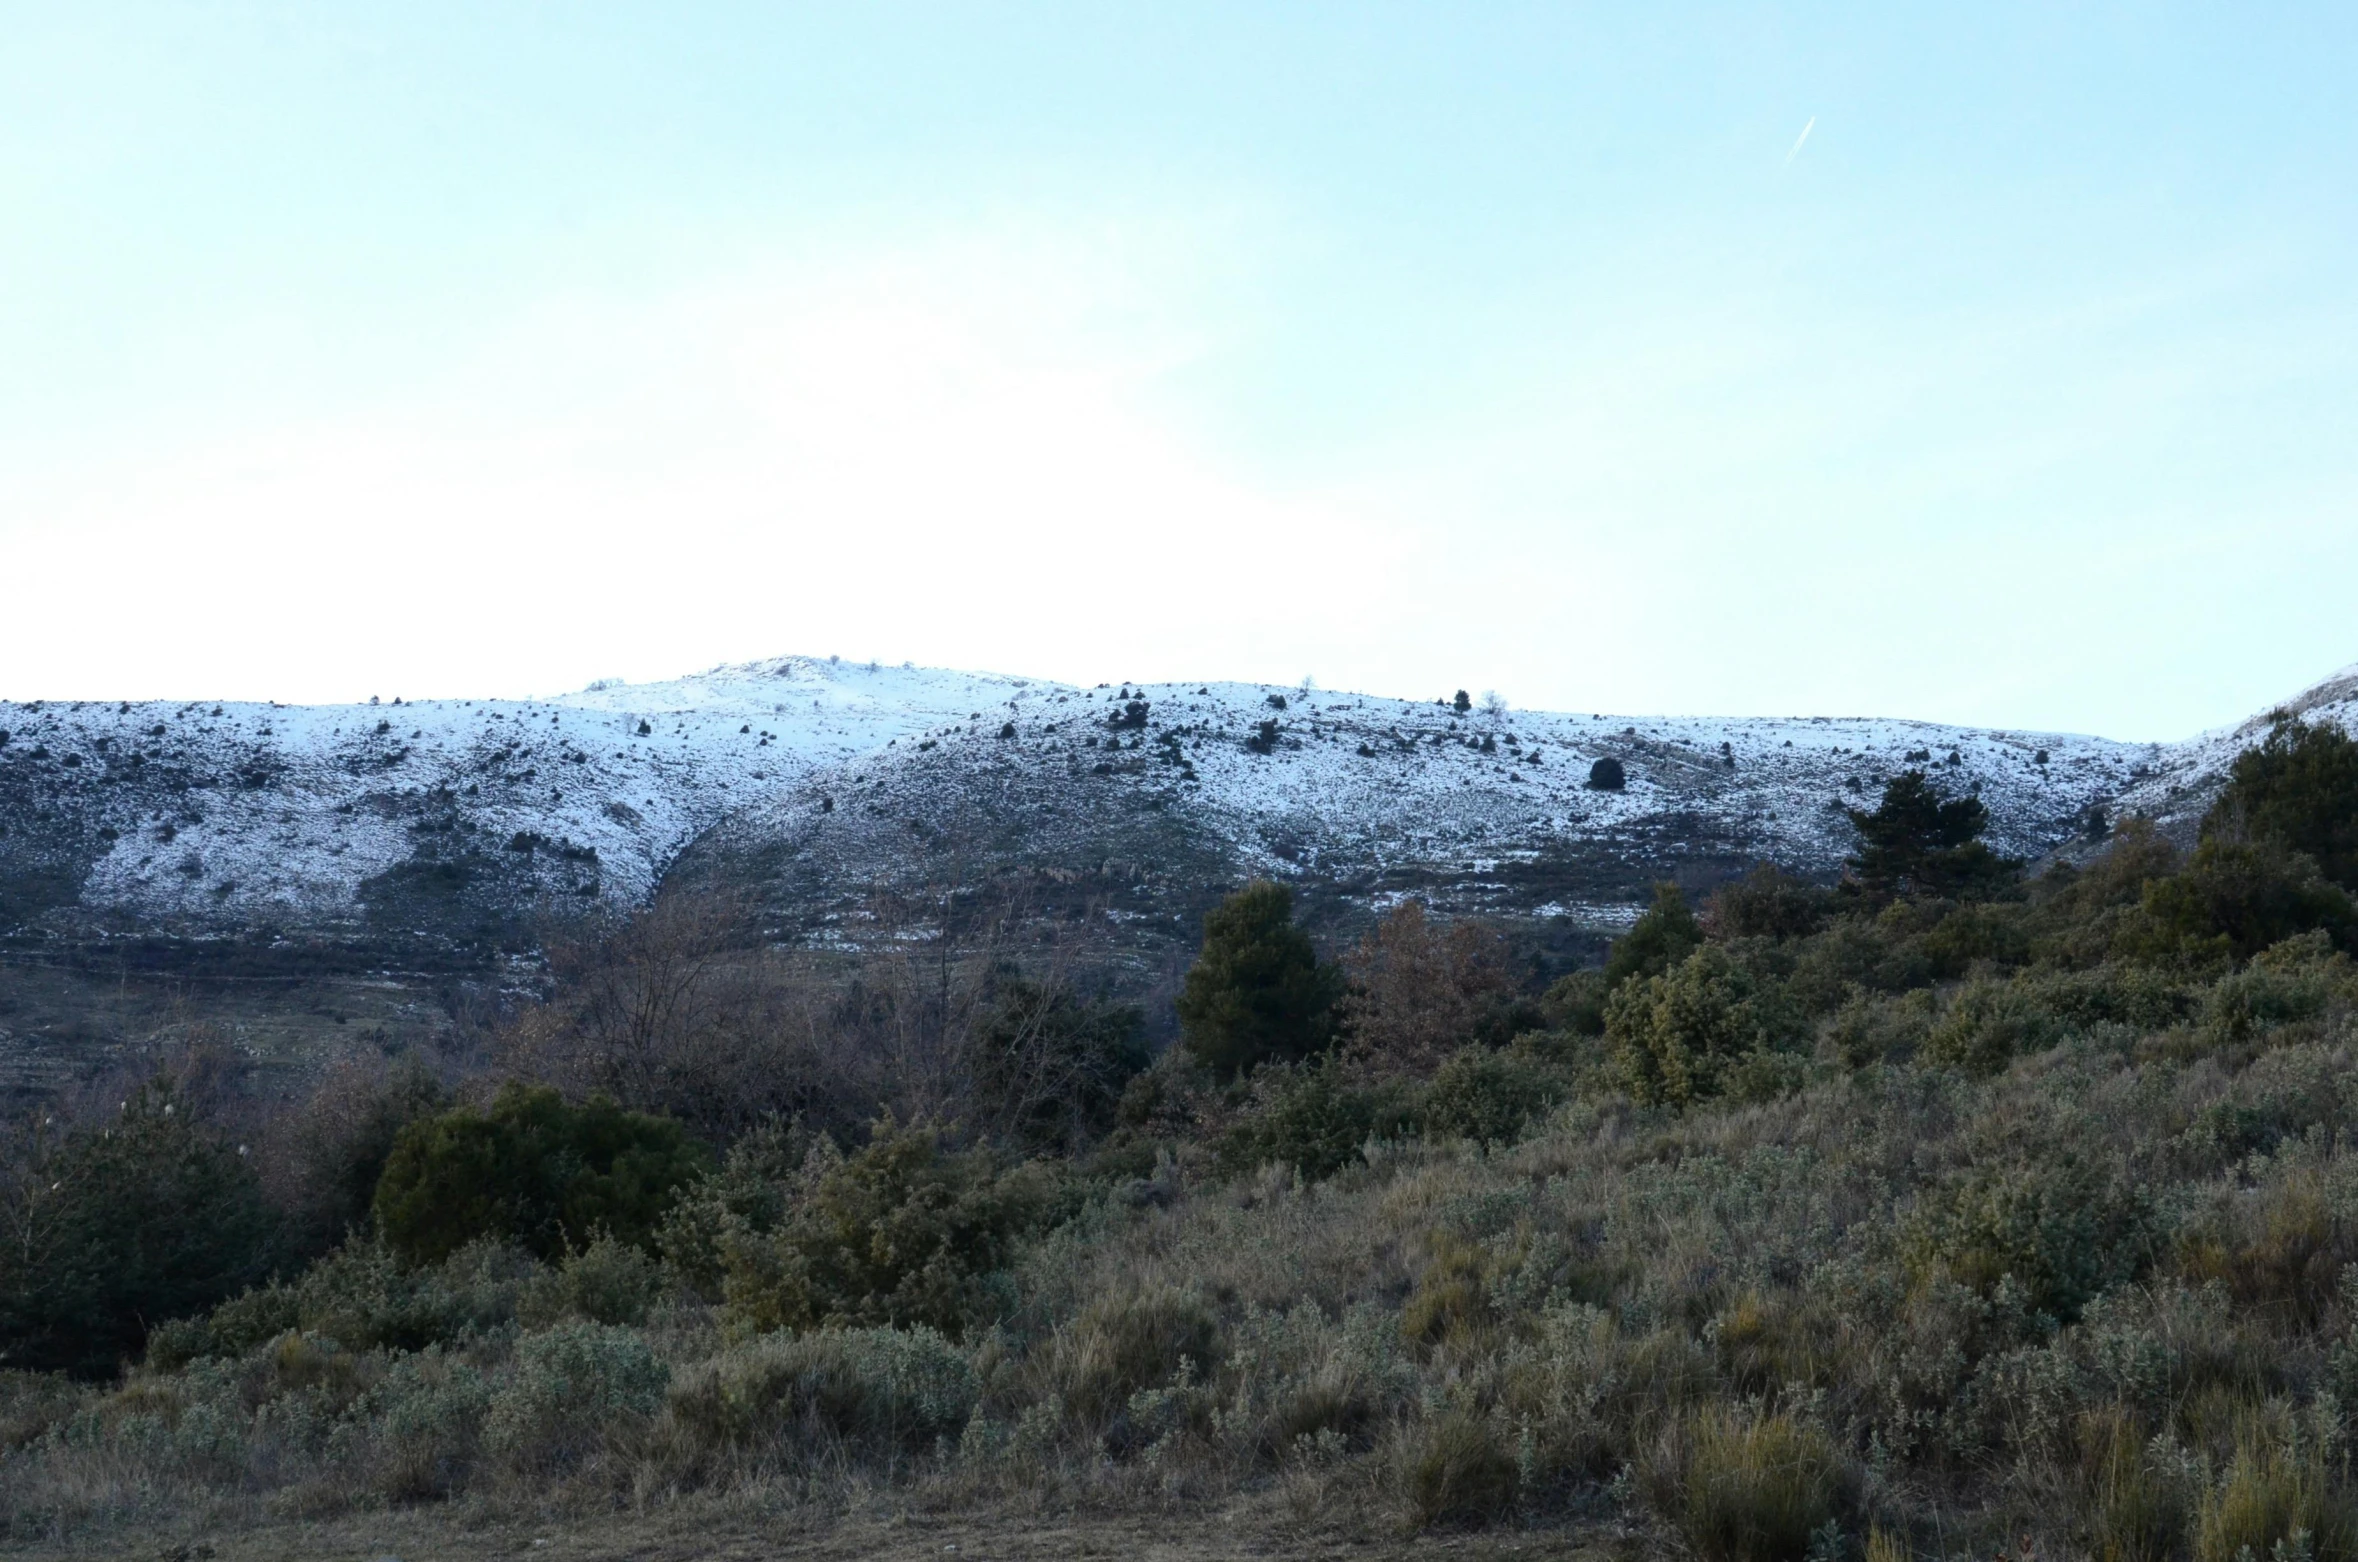 the mountain is covered with snow and it is next to some brown bushes